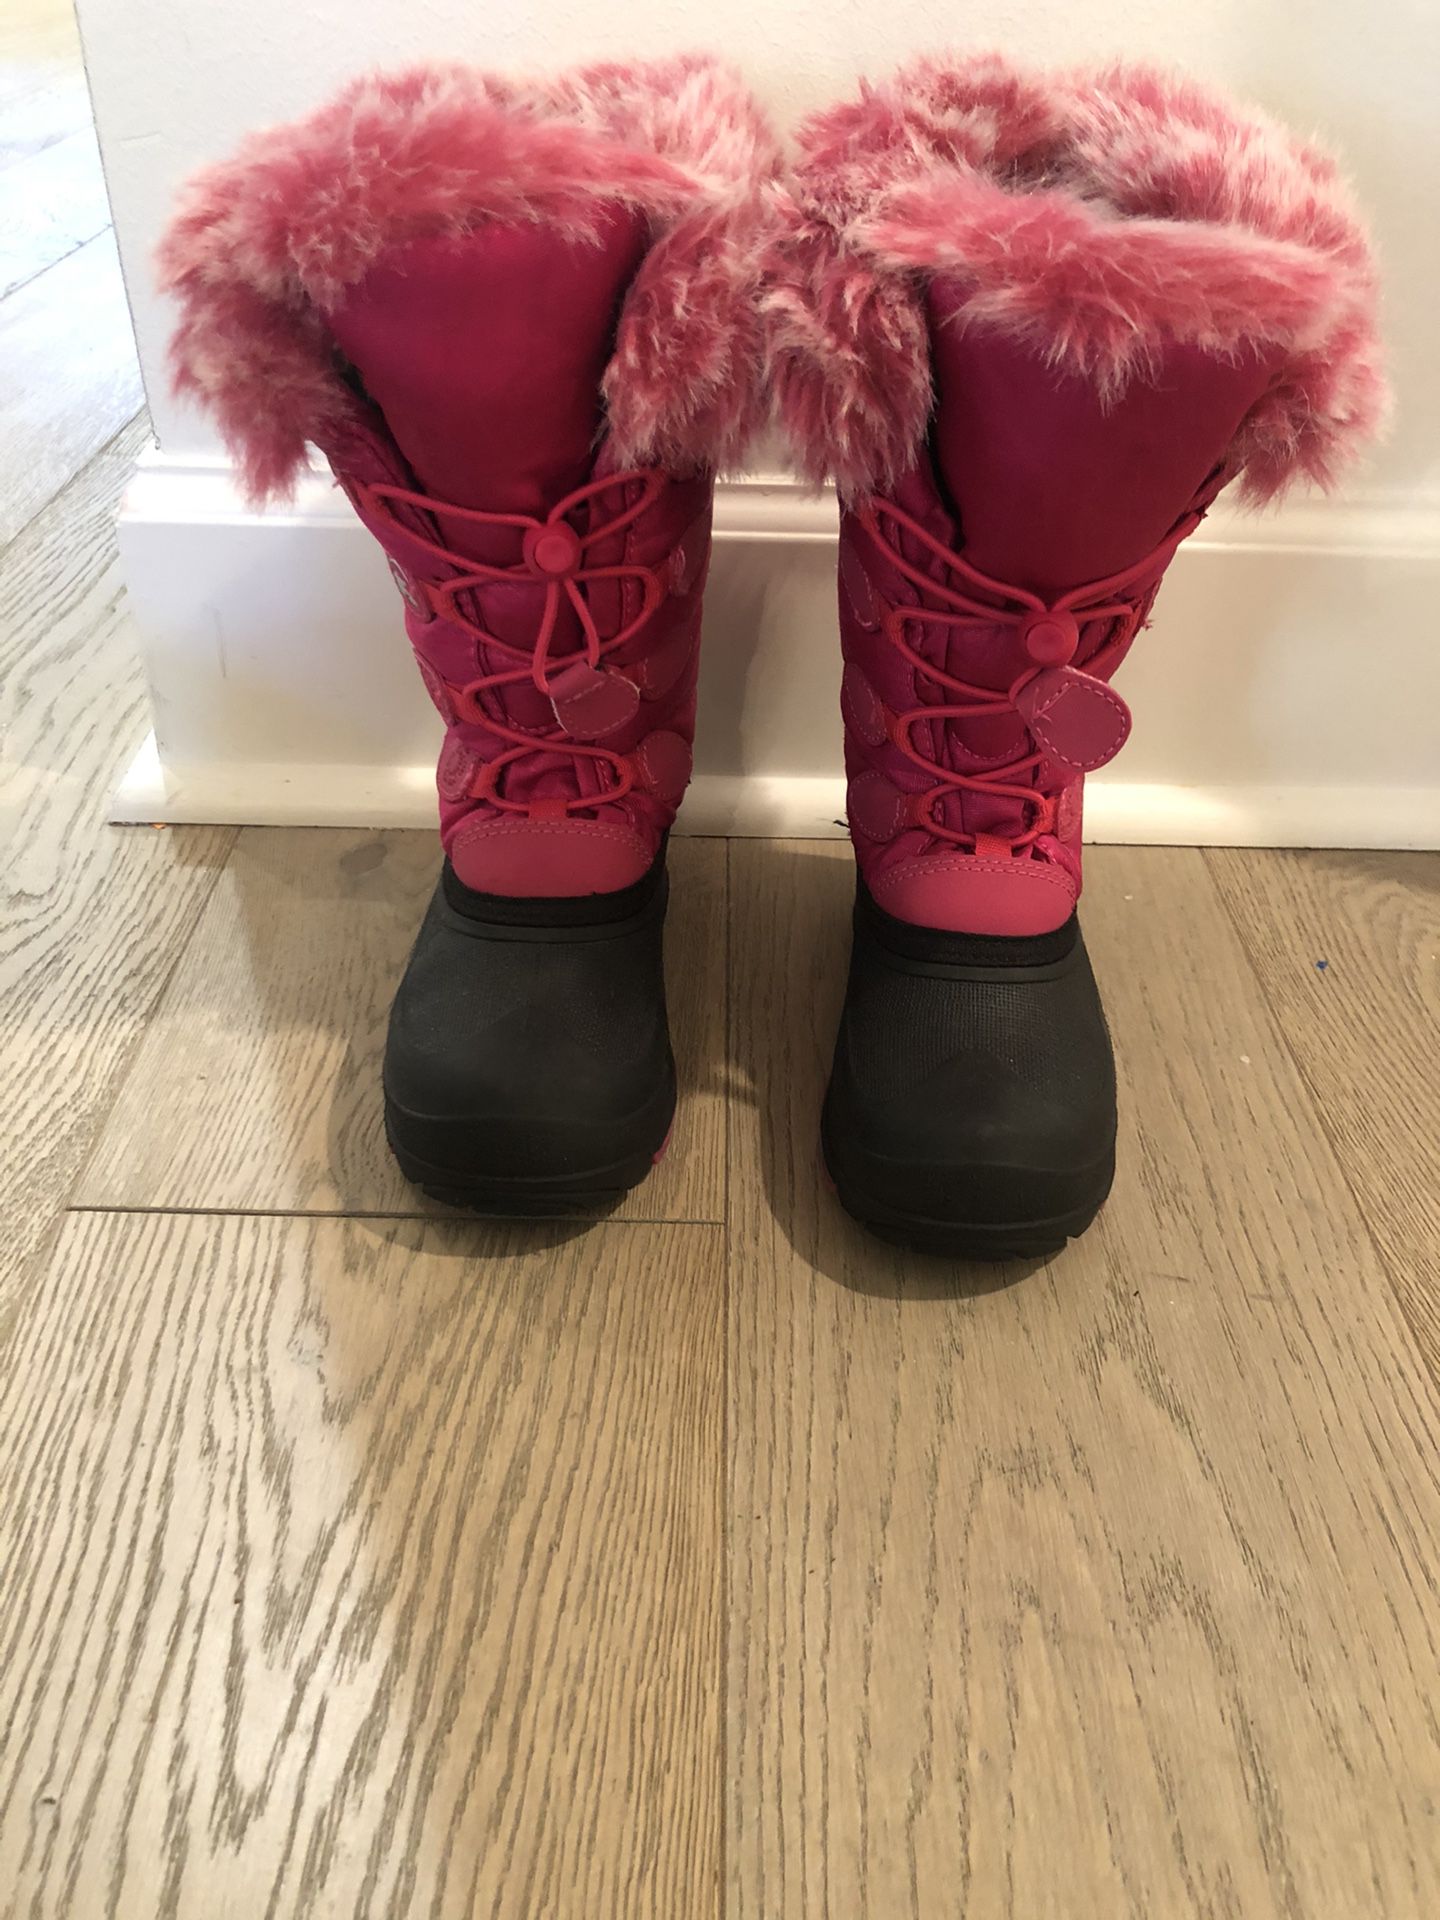 Kamik Girl’s Snow Boots - Size 13